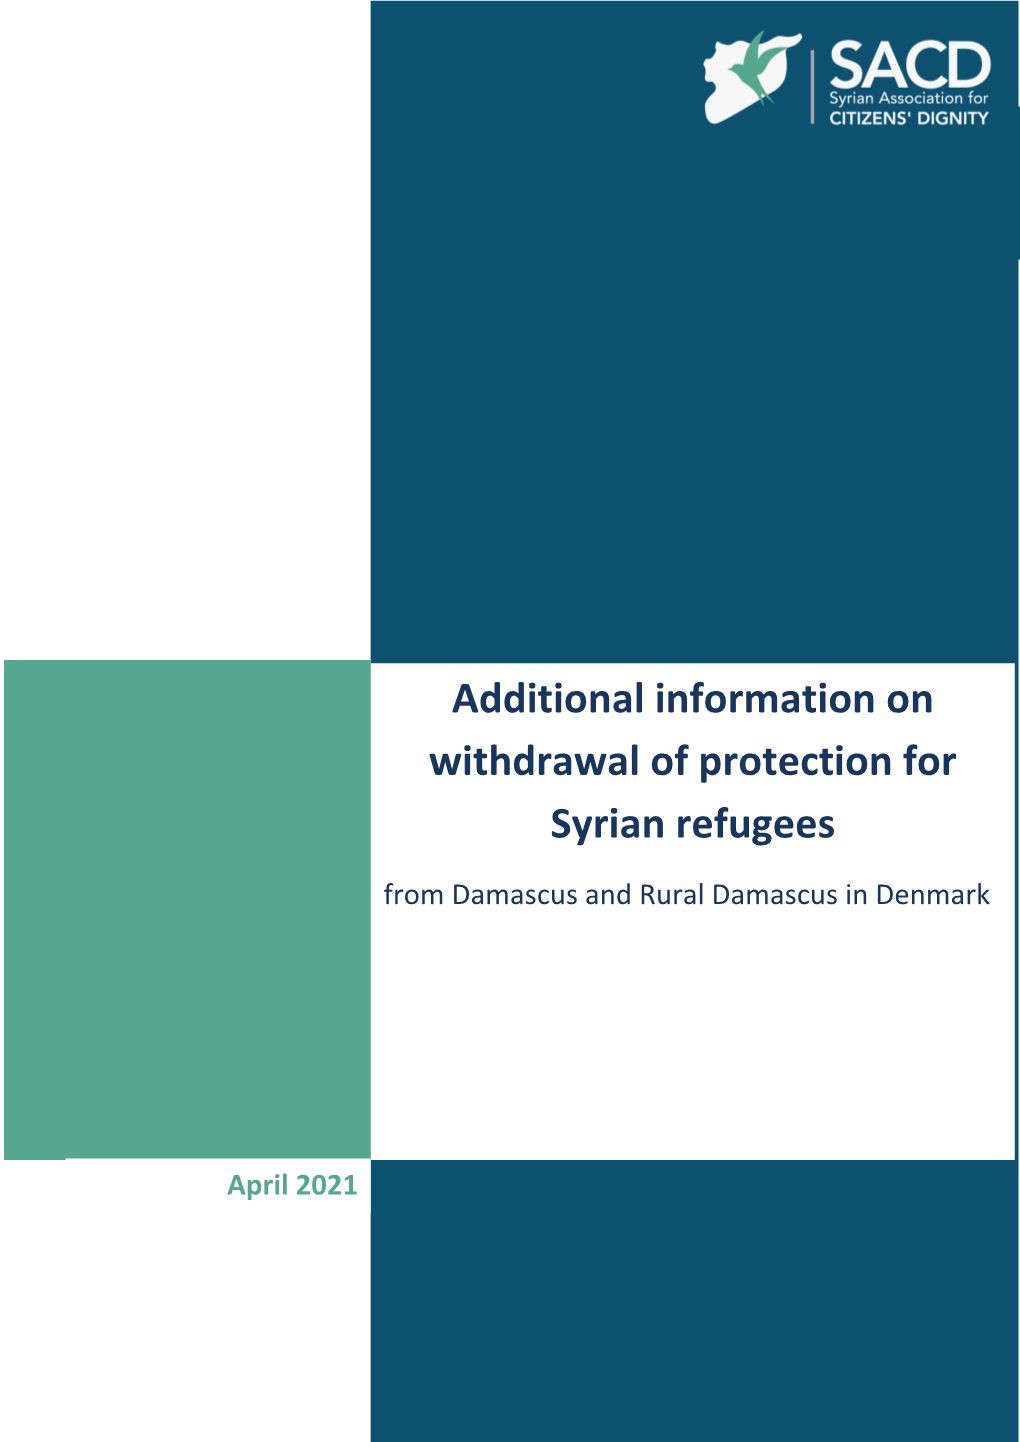 Additional Information on Withdrawal of Protection for Syrian Refugees